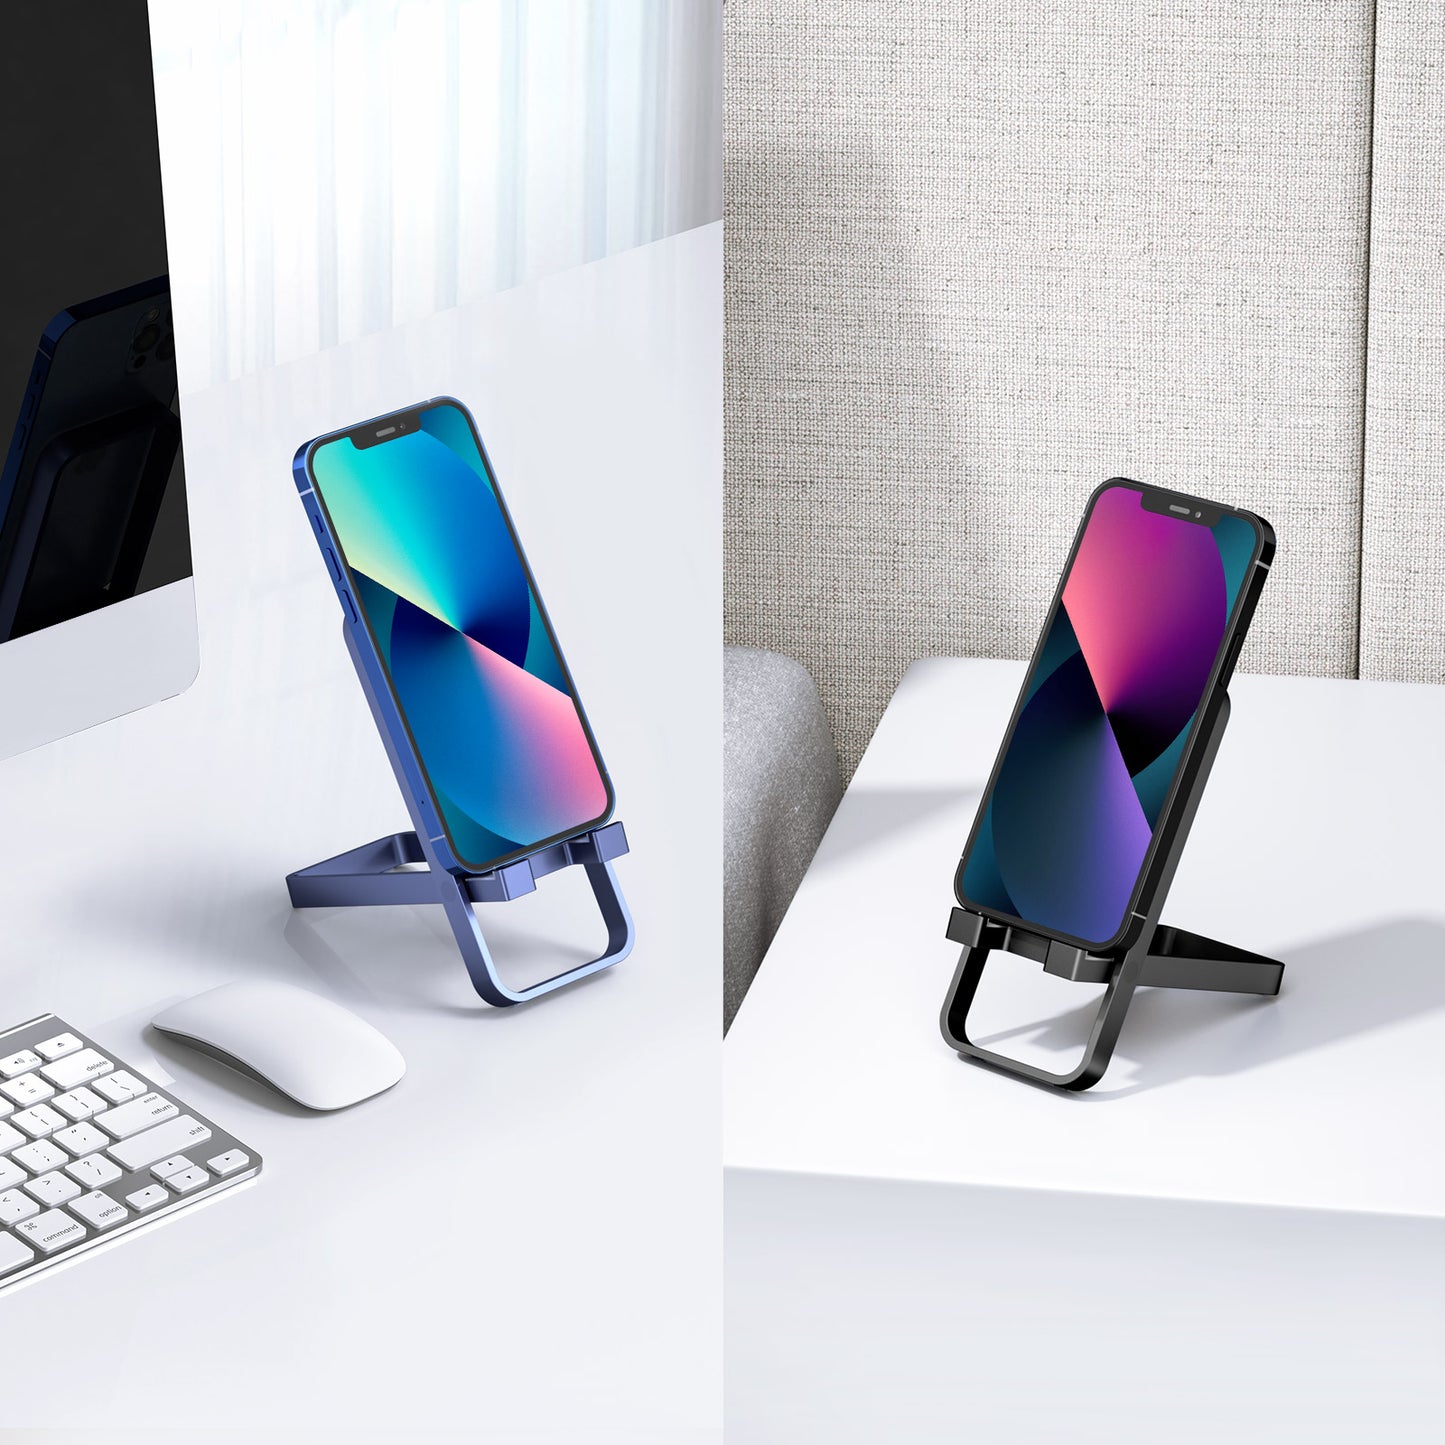 【Phone Stand】スマートフォン 携帯端末 タブレット iPhone android スタンド 軽量 アルミ合金 角度調整 D0043